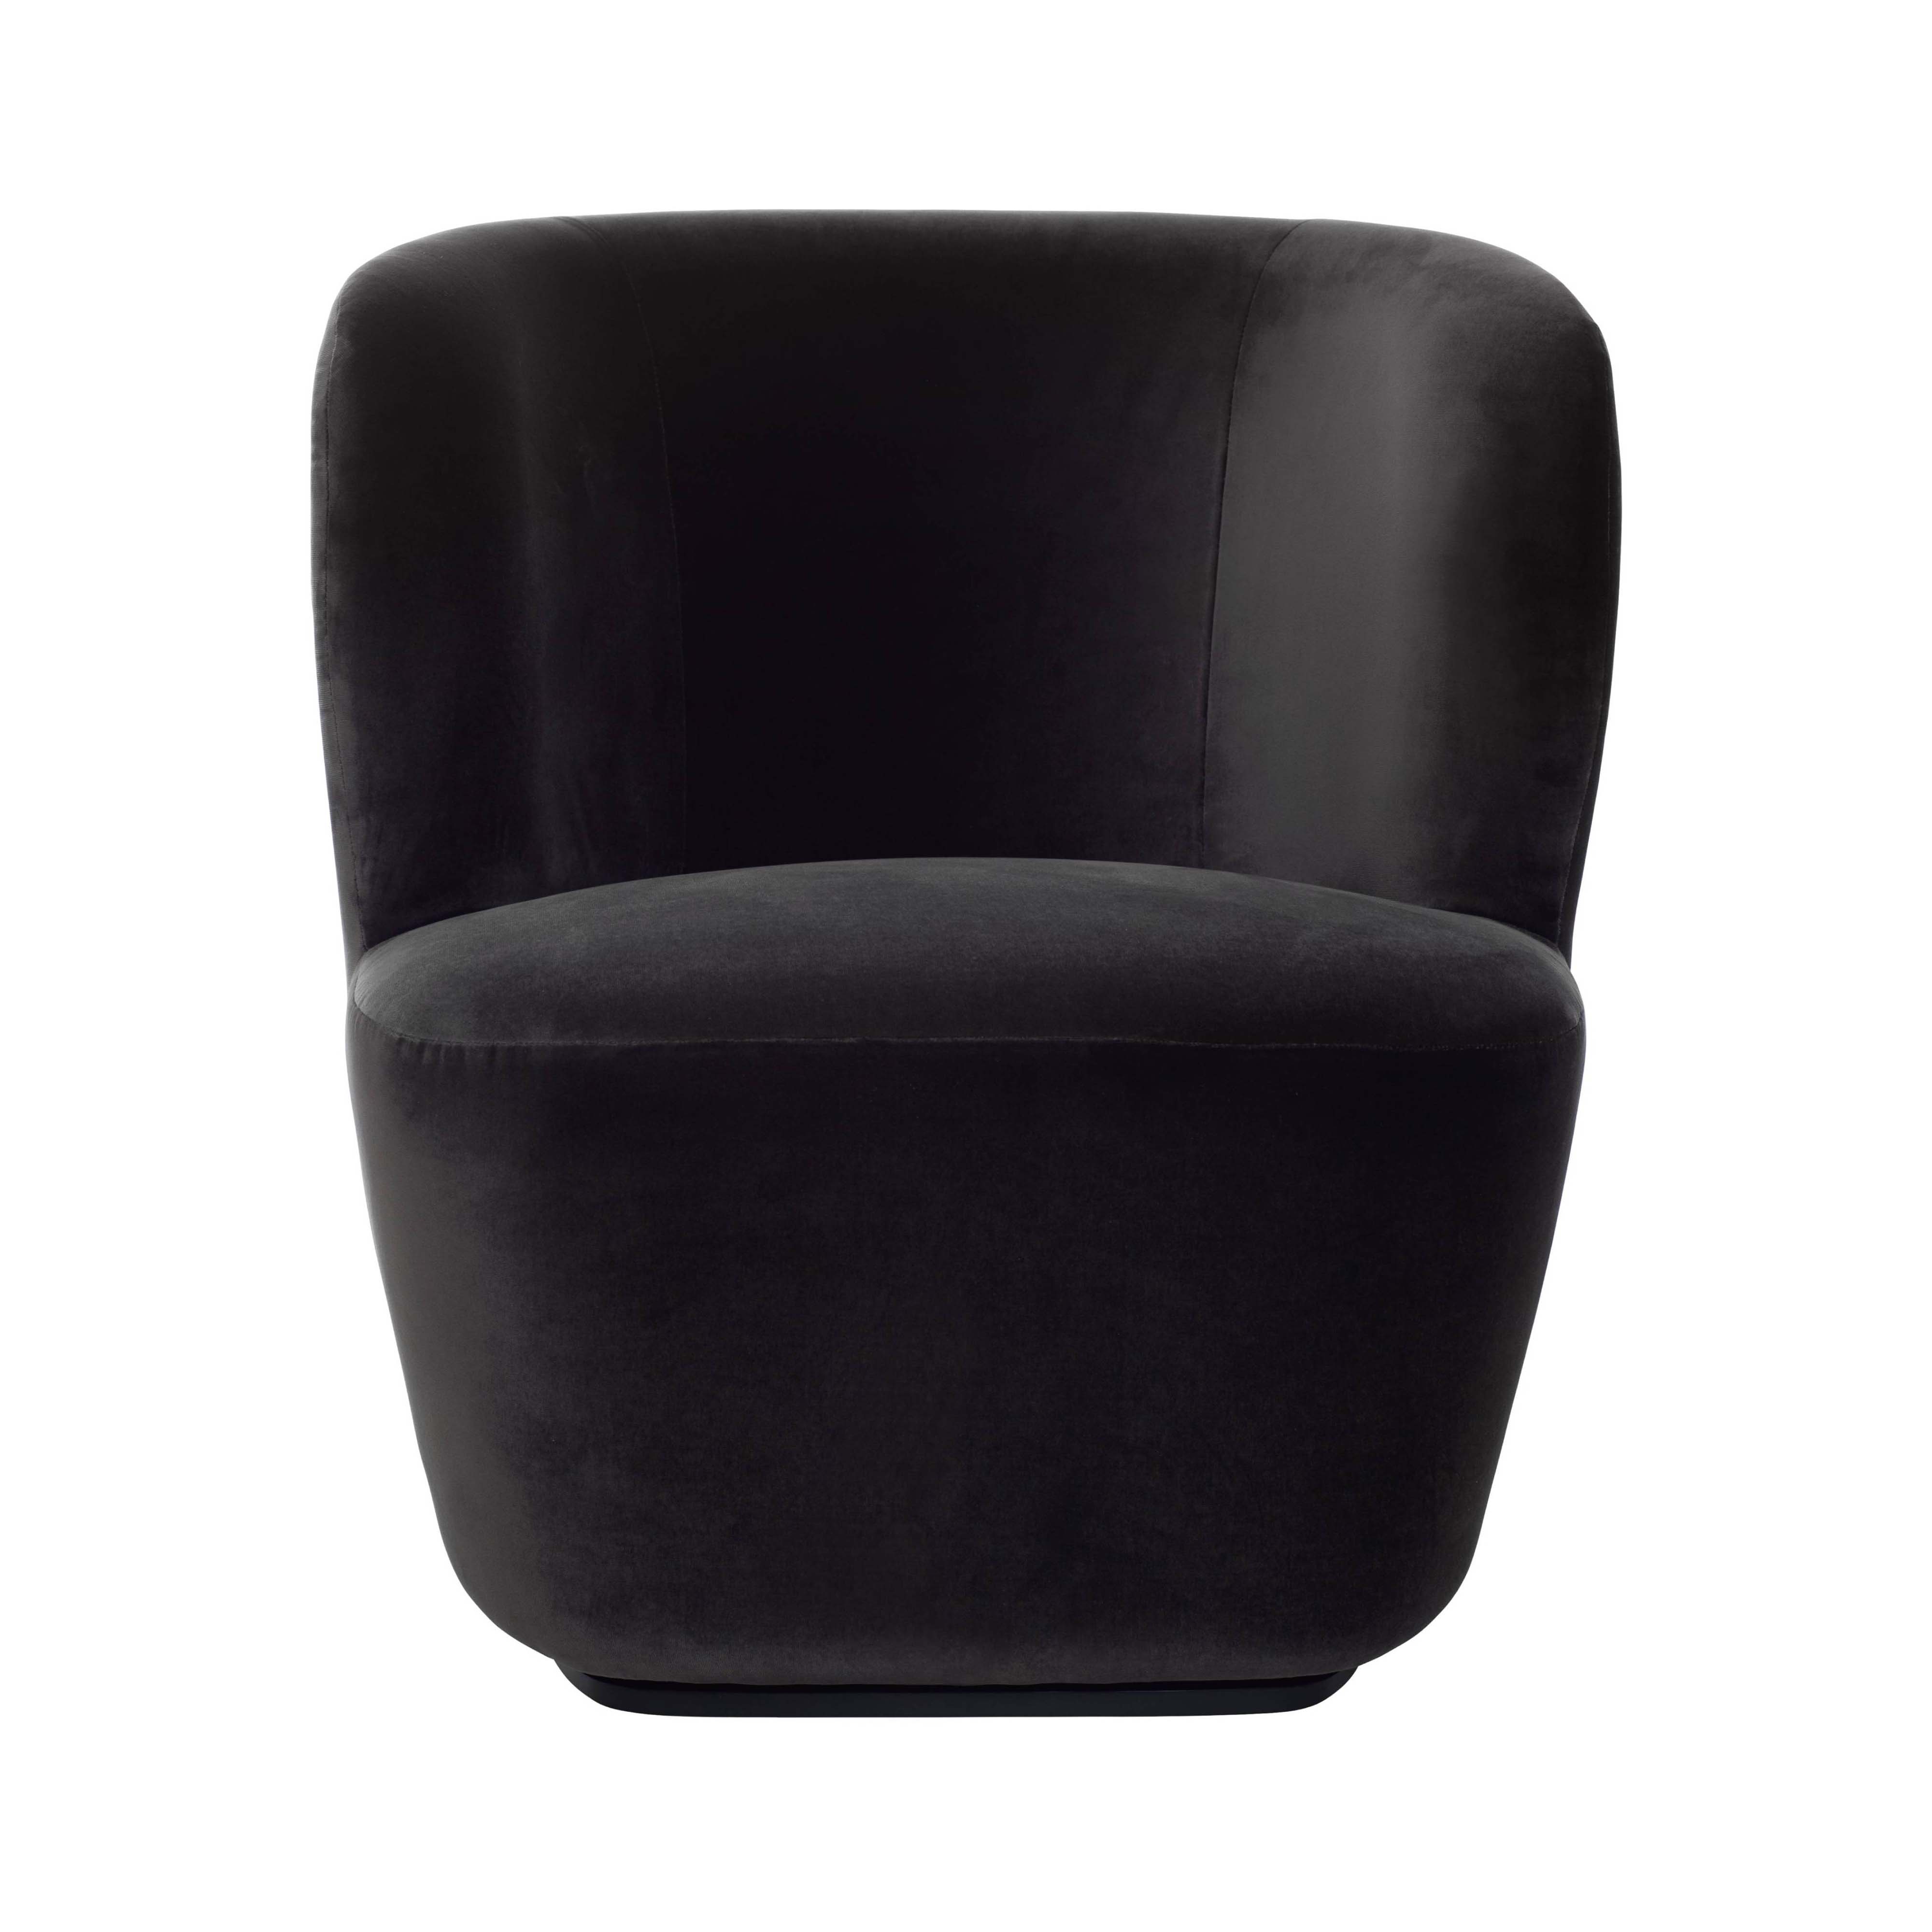 Stay Lounge Chair: Black + Velluto